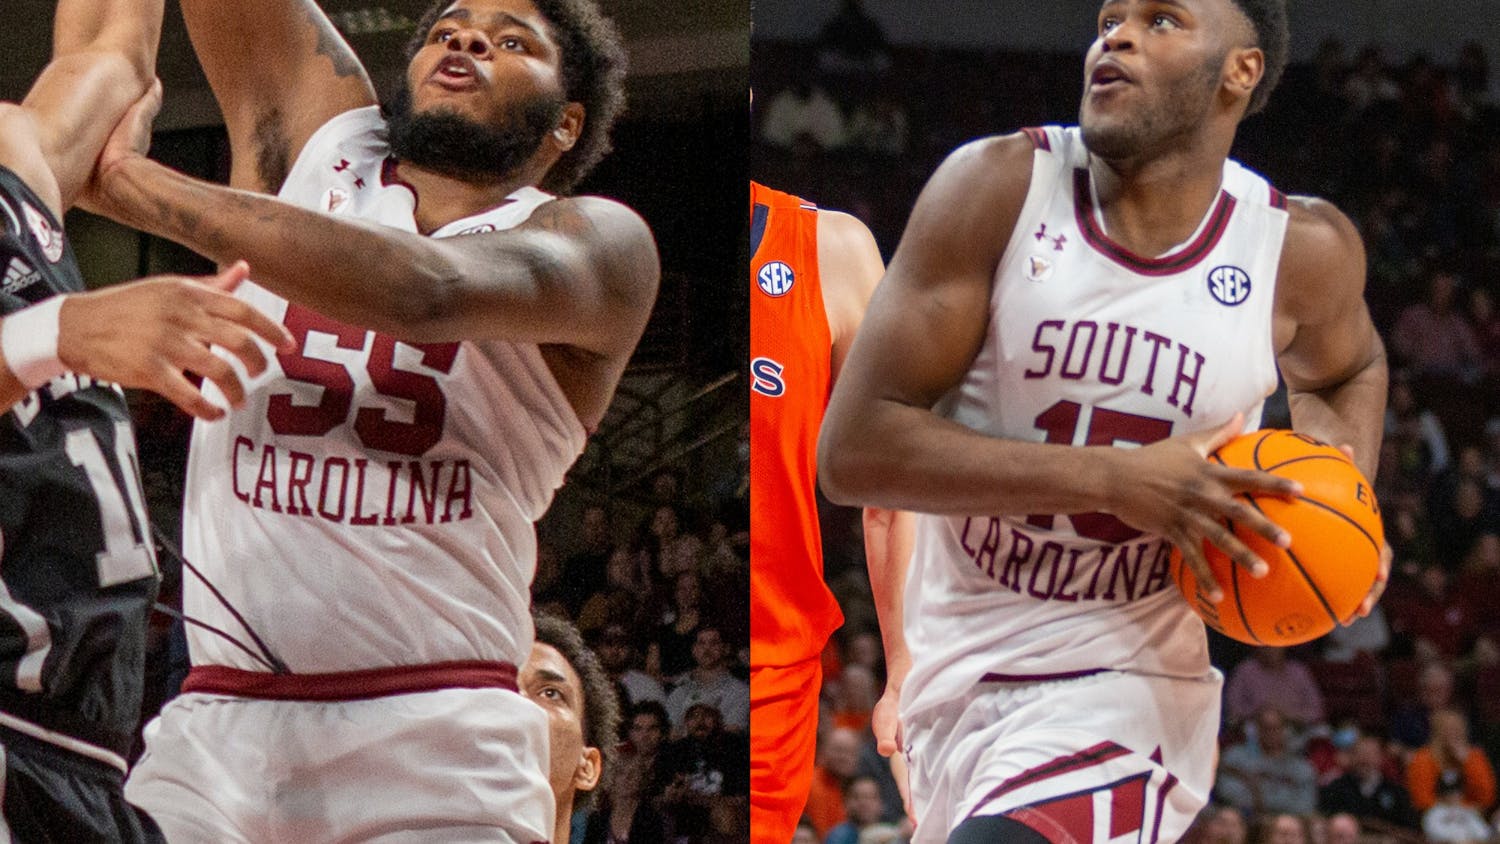 Ta'Quan Woodley (left) and Wildens Leveque (right) have entered the transfer portal following the departure of former South Carolina men's basketball head coach Frank Martin.